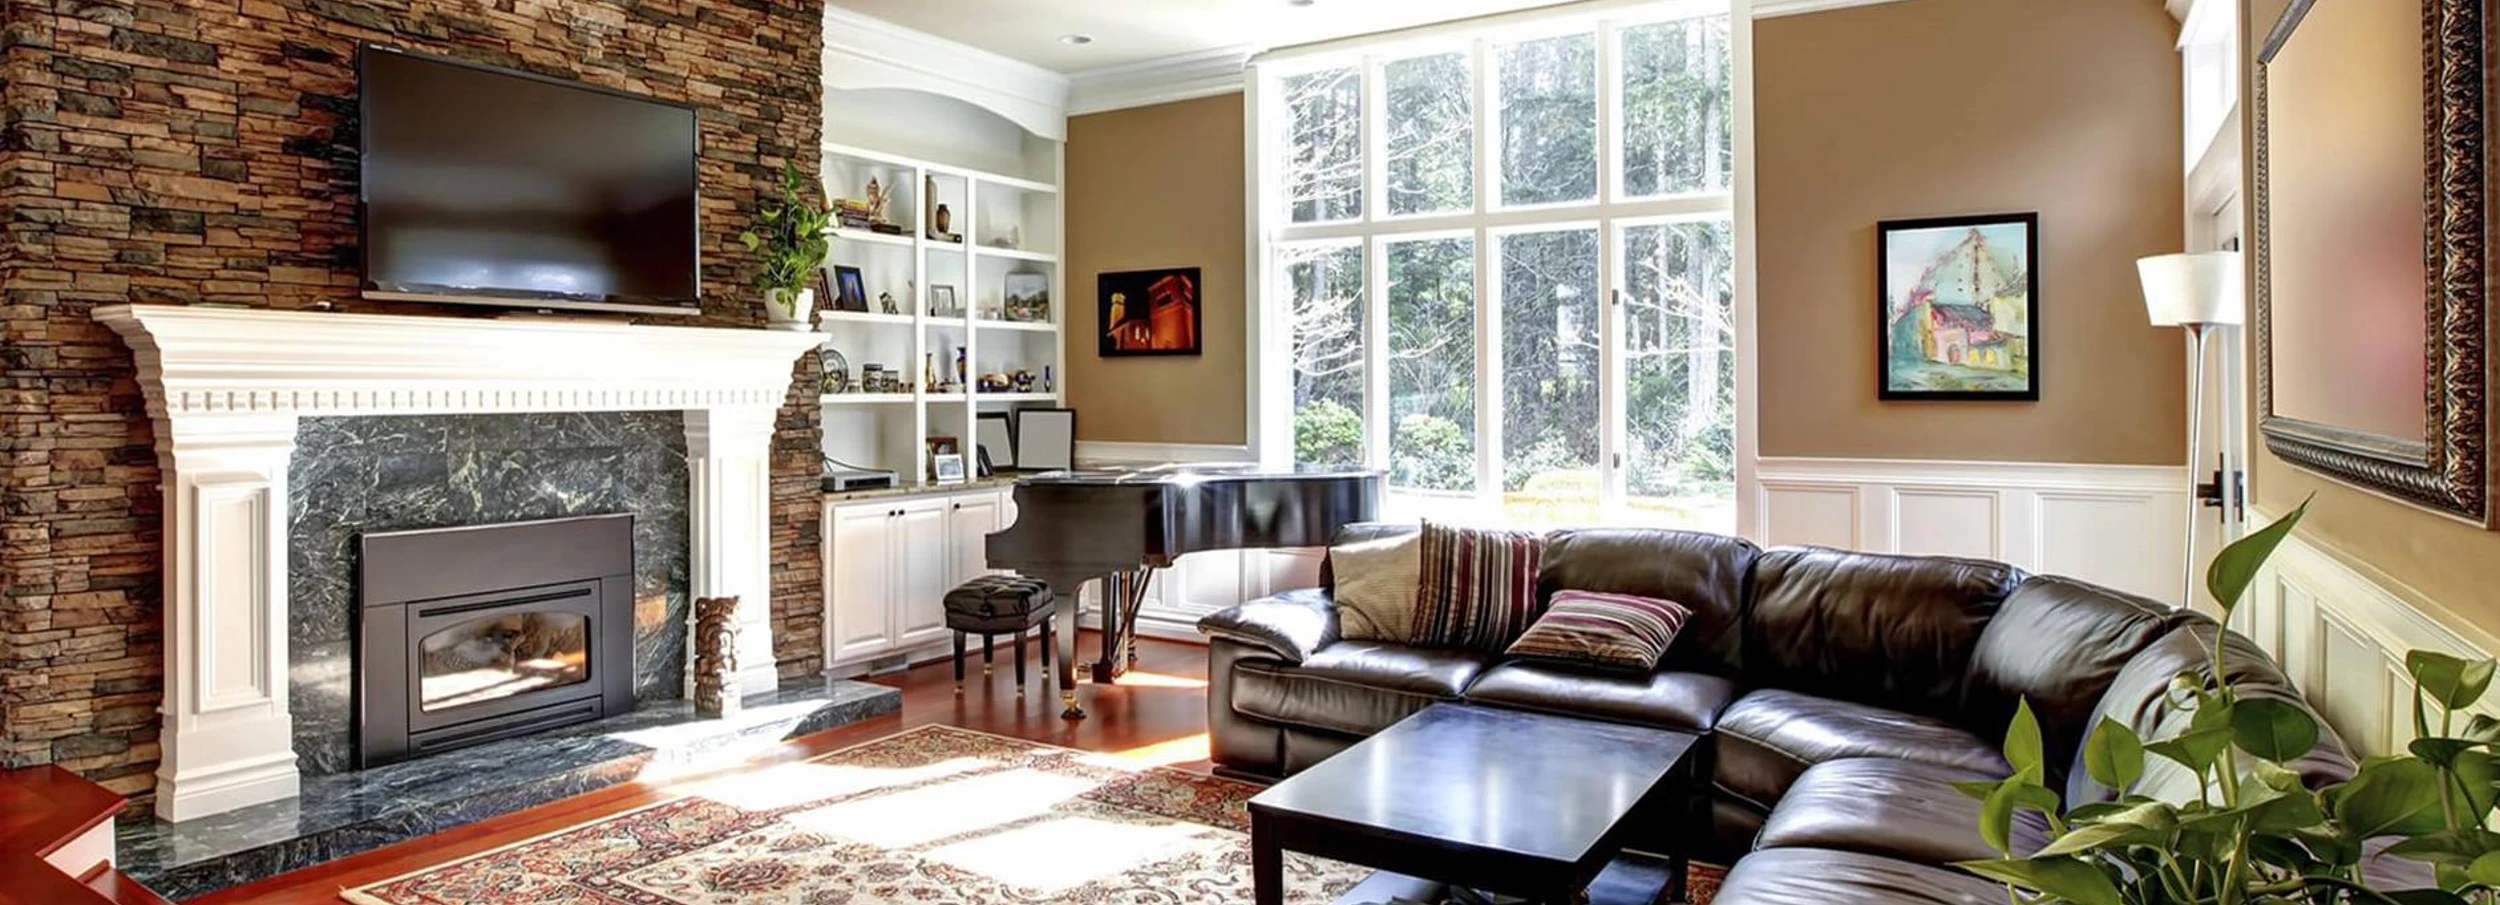 Sunny living room with brown leather sectional sofa and a fireplace.